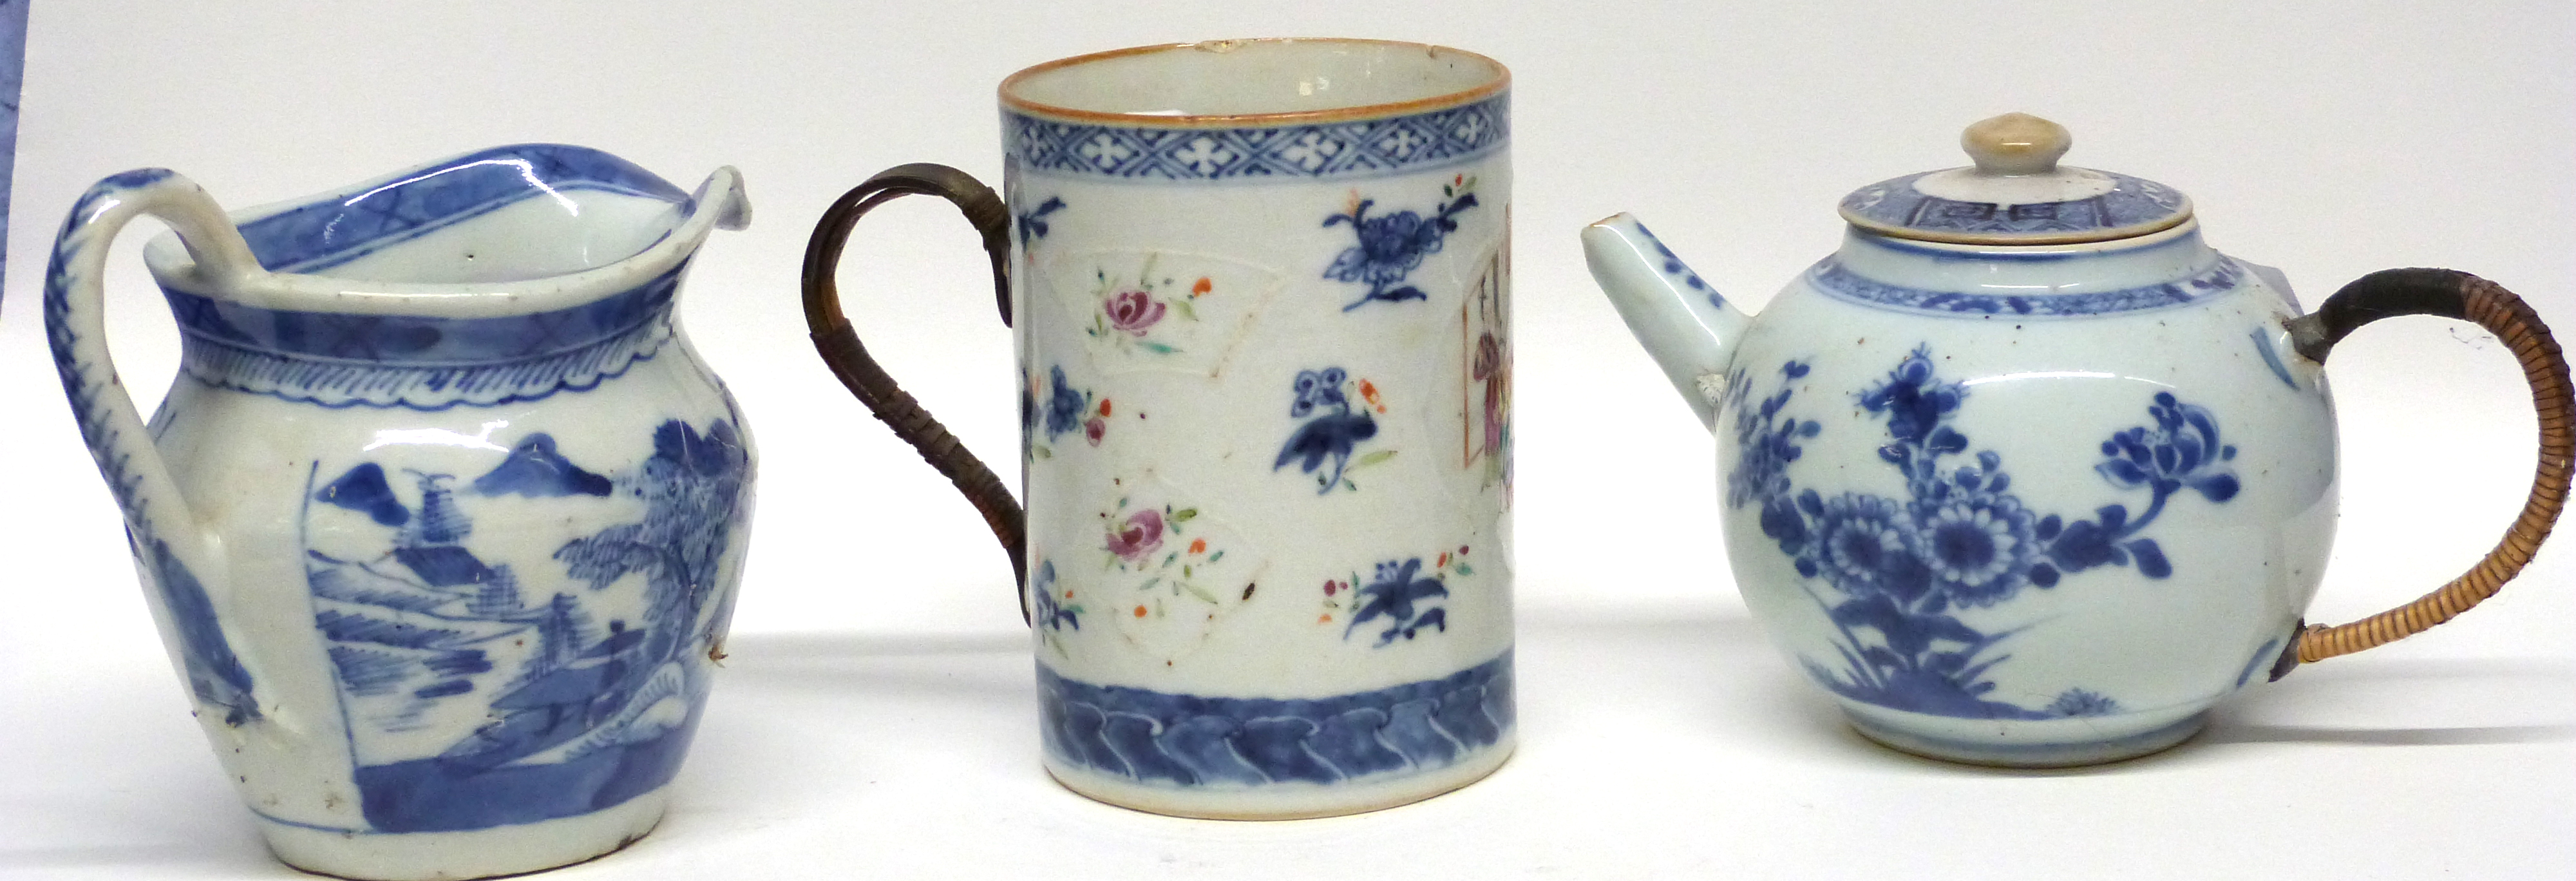 Selection of 18th/19th century Chinese porcelain including a Chinese export mug decorated in enamels - Image 2 of 2